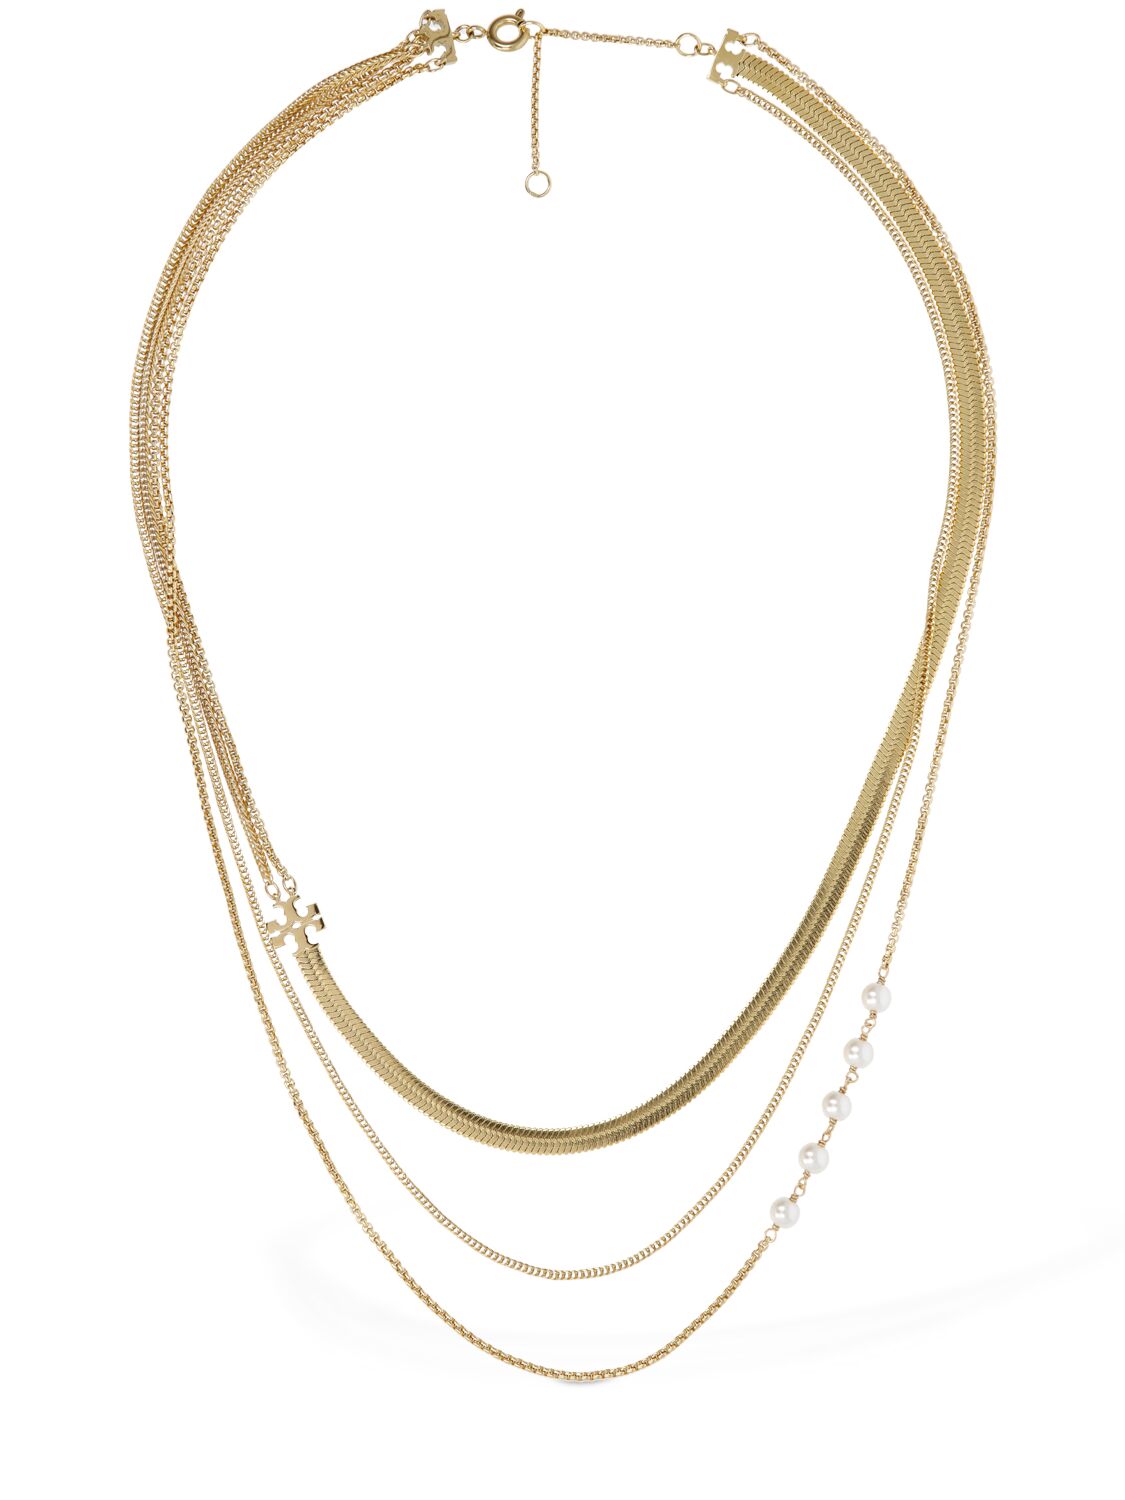 Tory Burch Kira Pearl Layered Necklace In Gold